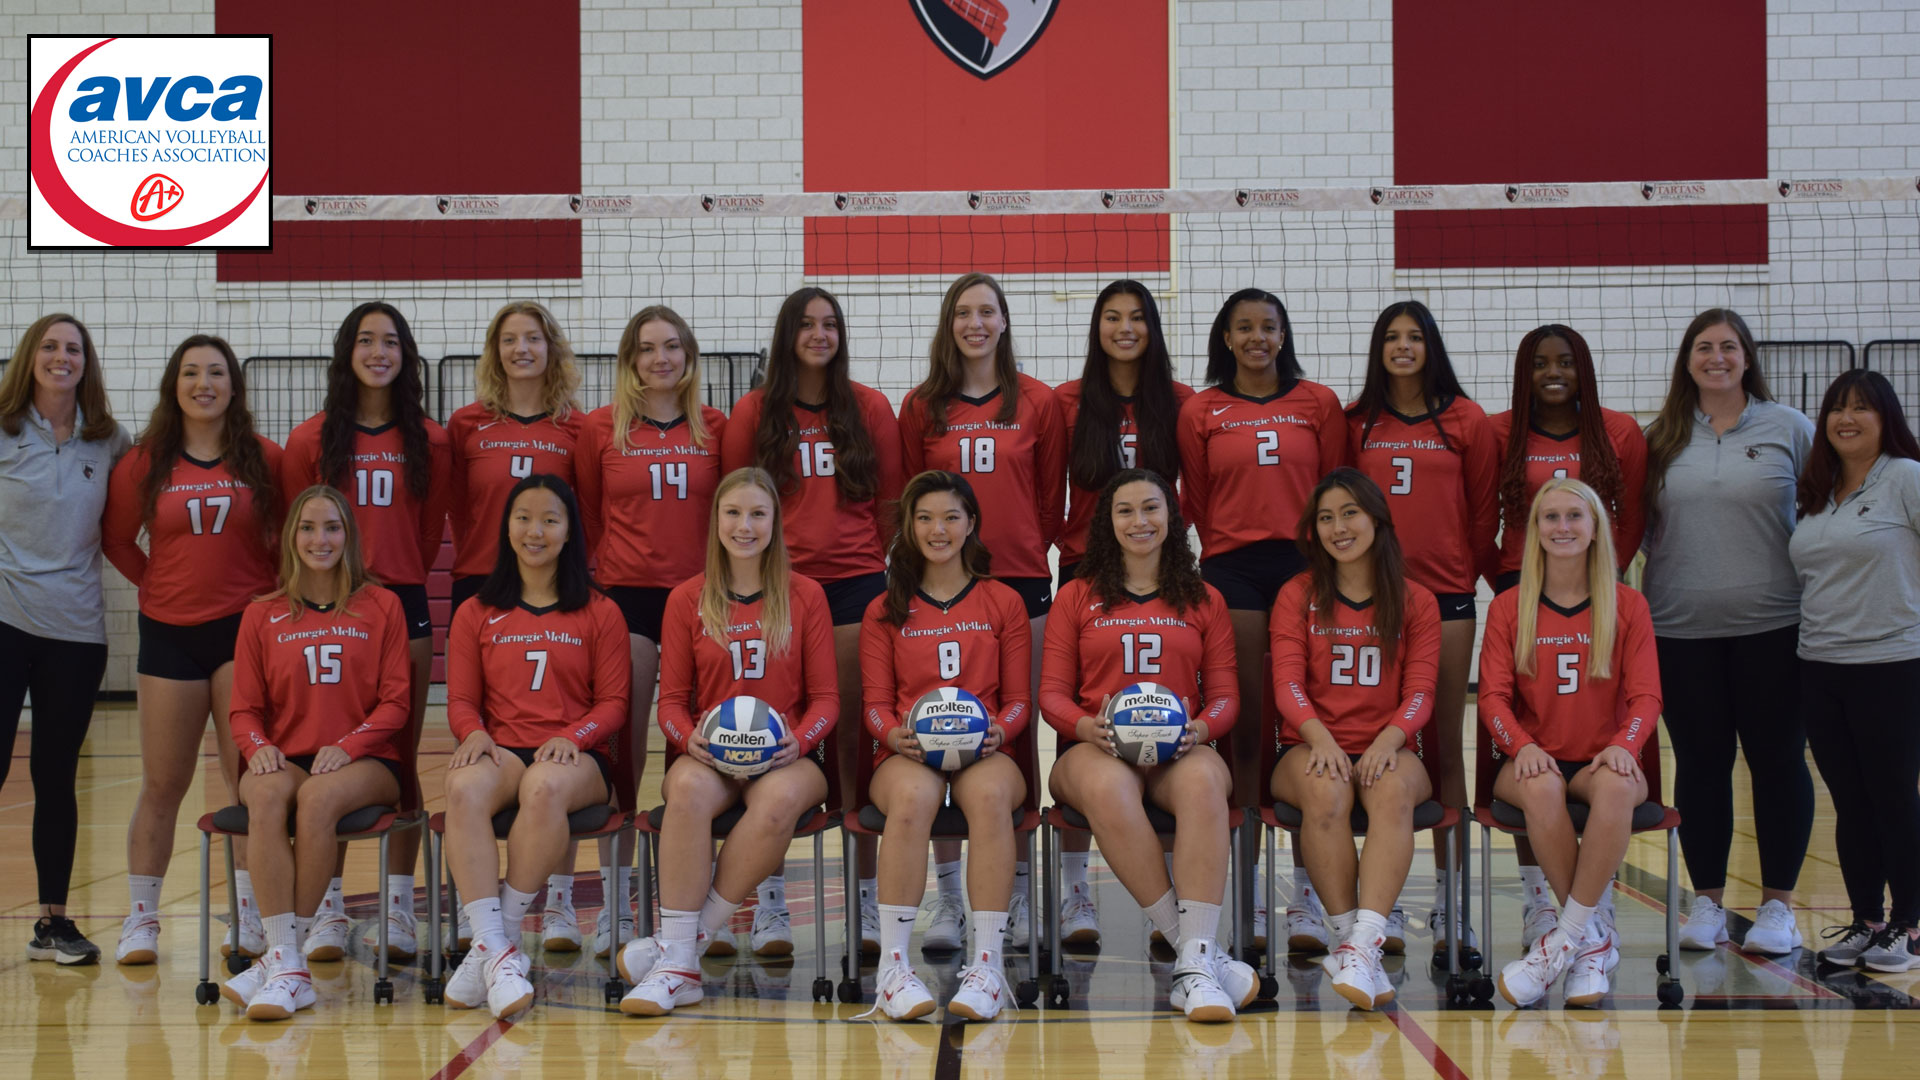 group photo of a women's volleyball team with one row standing and one sitting, logo of AVCA Academic Award in top left corner